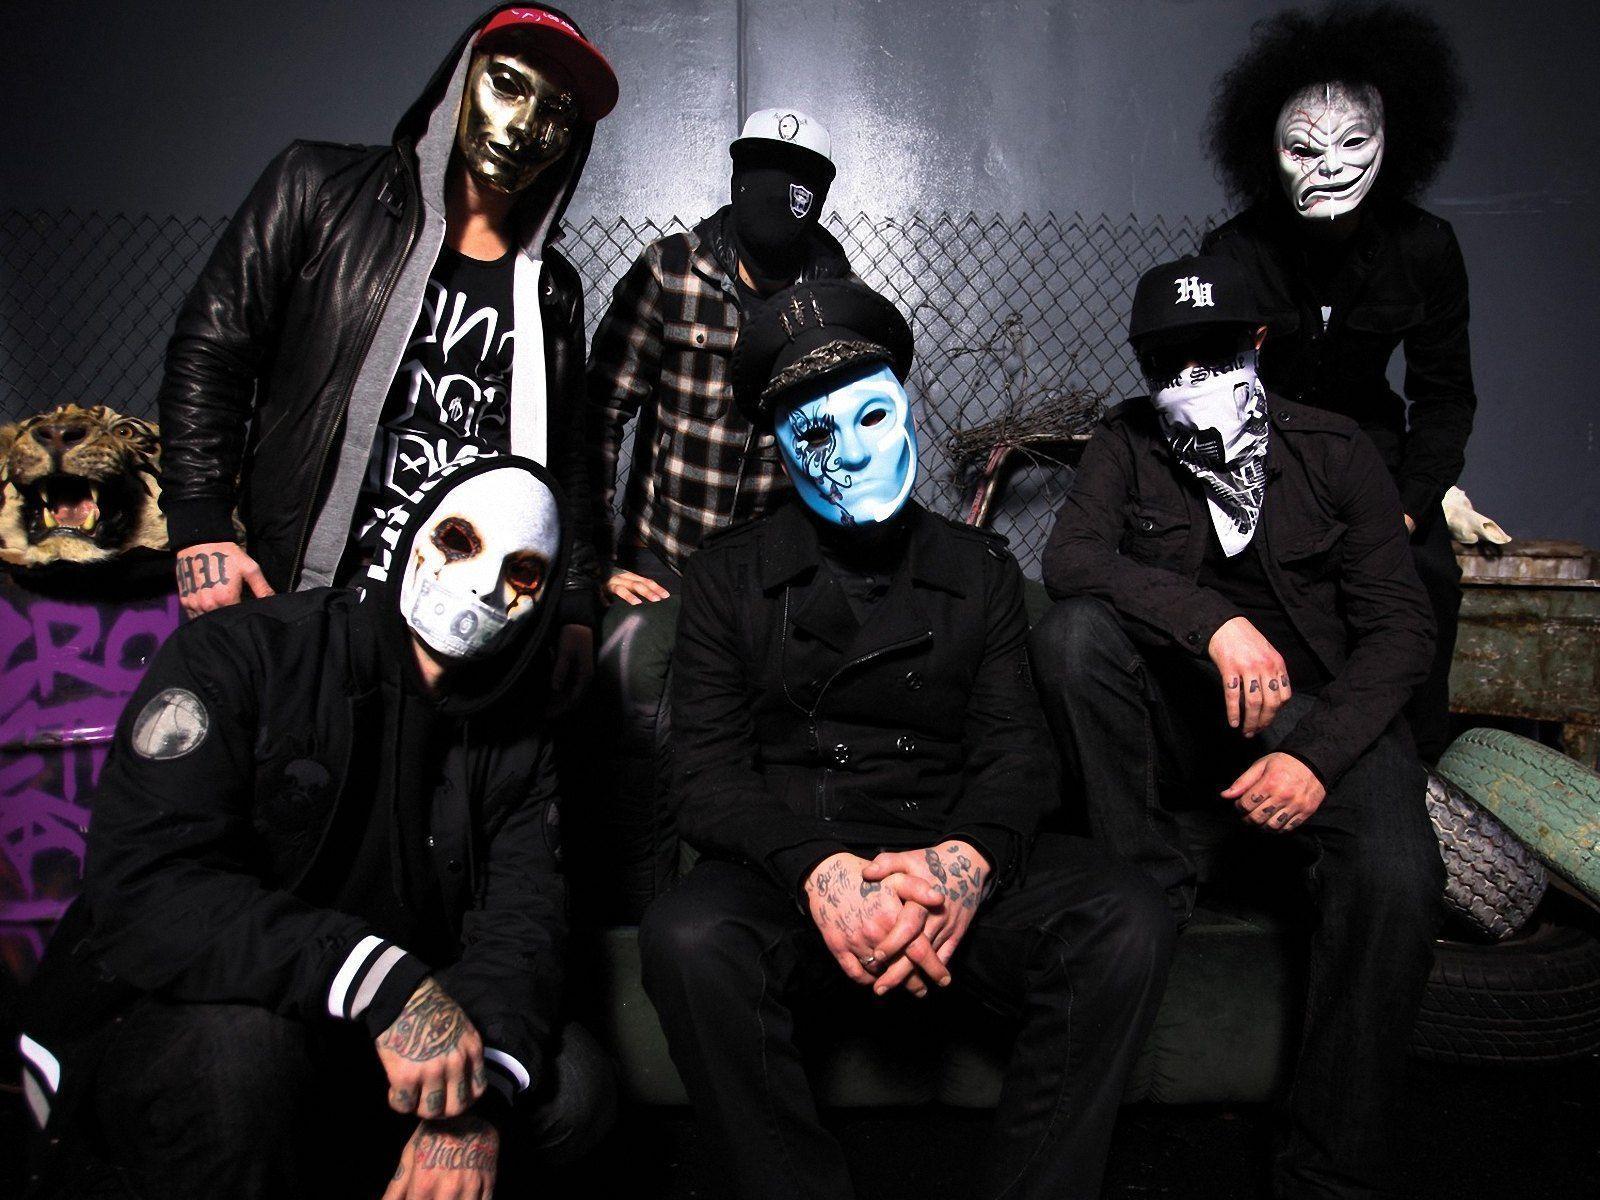 Hollywood Undead 2011 Wallpaper